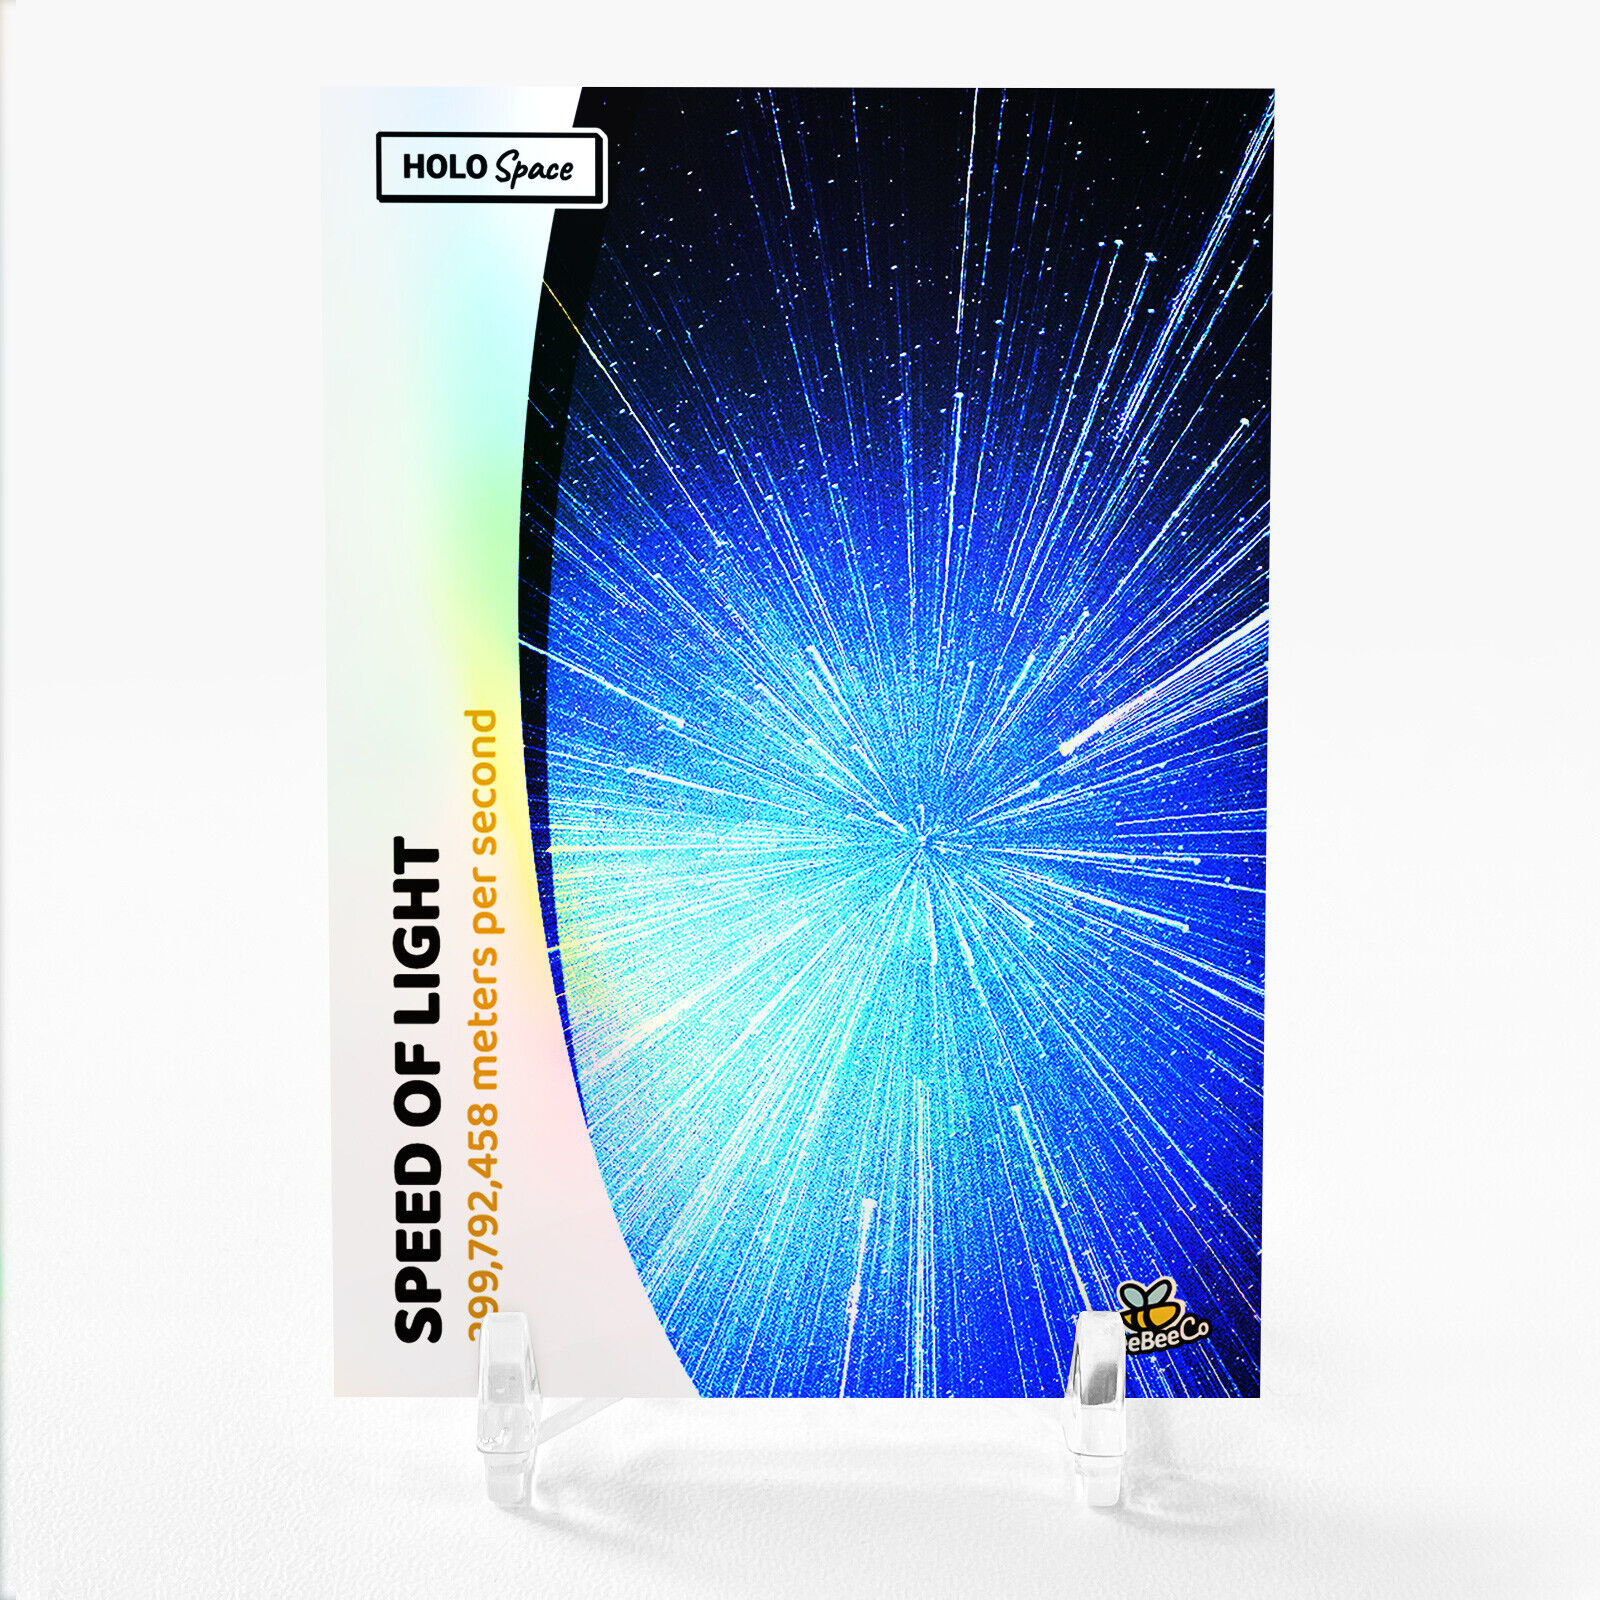 SPEED OF LIGHT Card GleeBeeCo Holo Space 299,792,458 meters per second #SP29